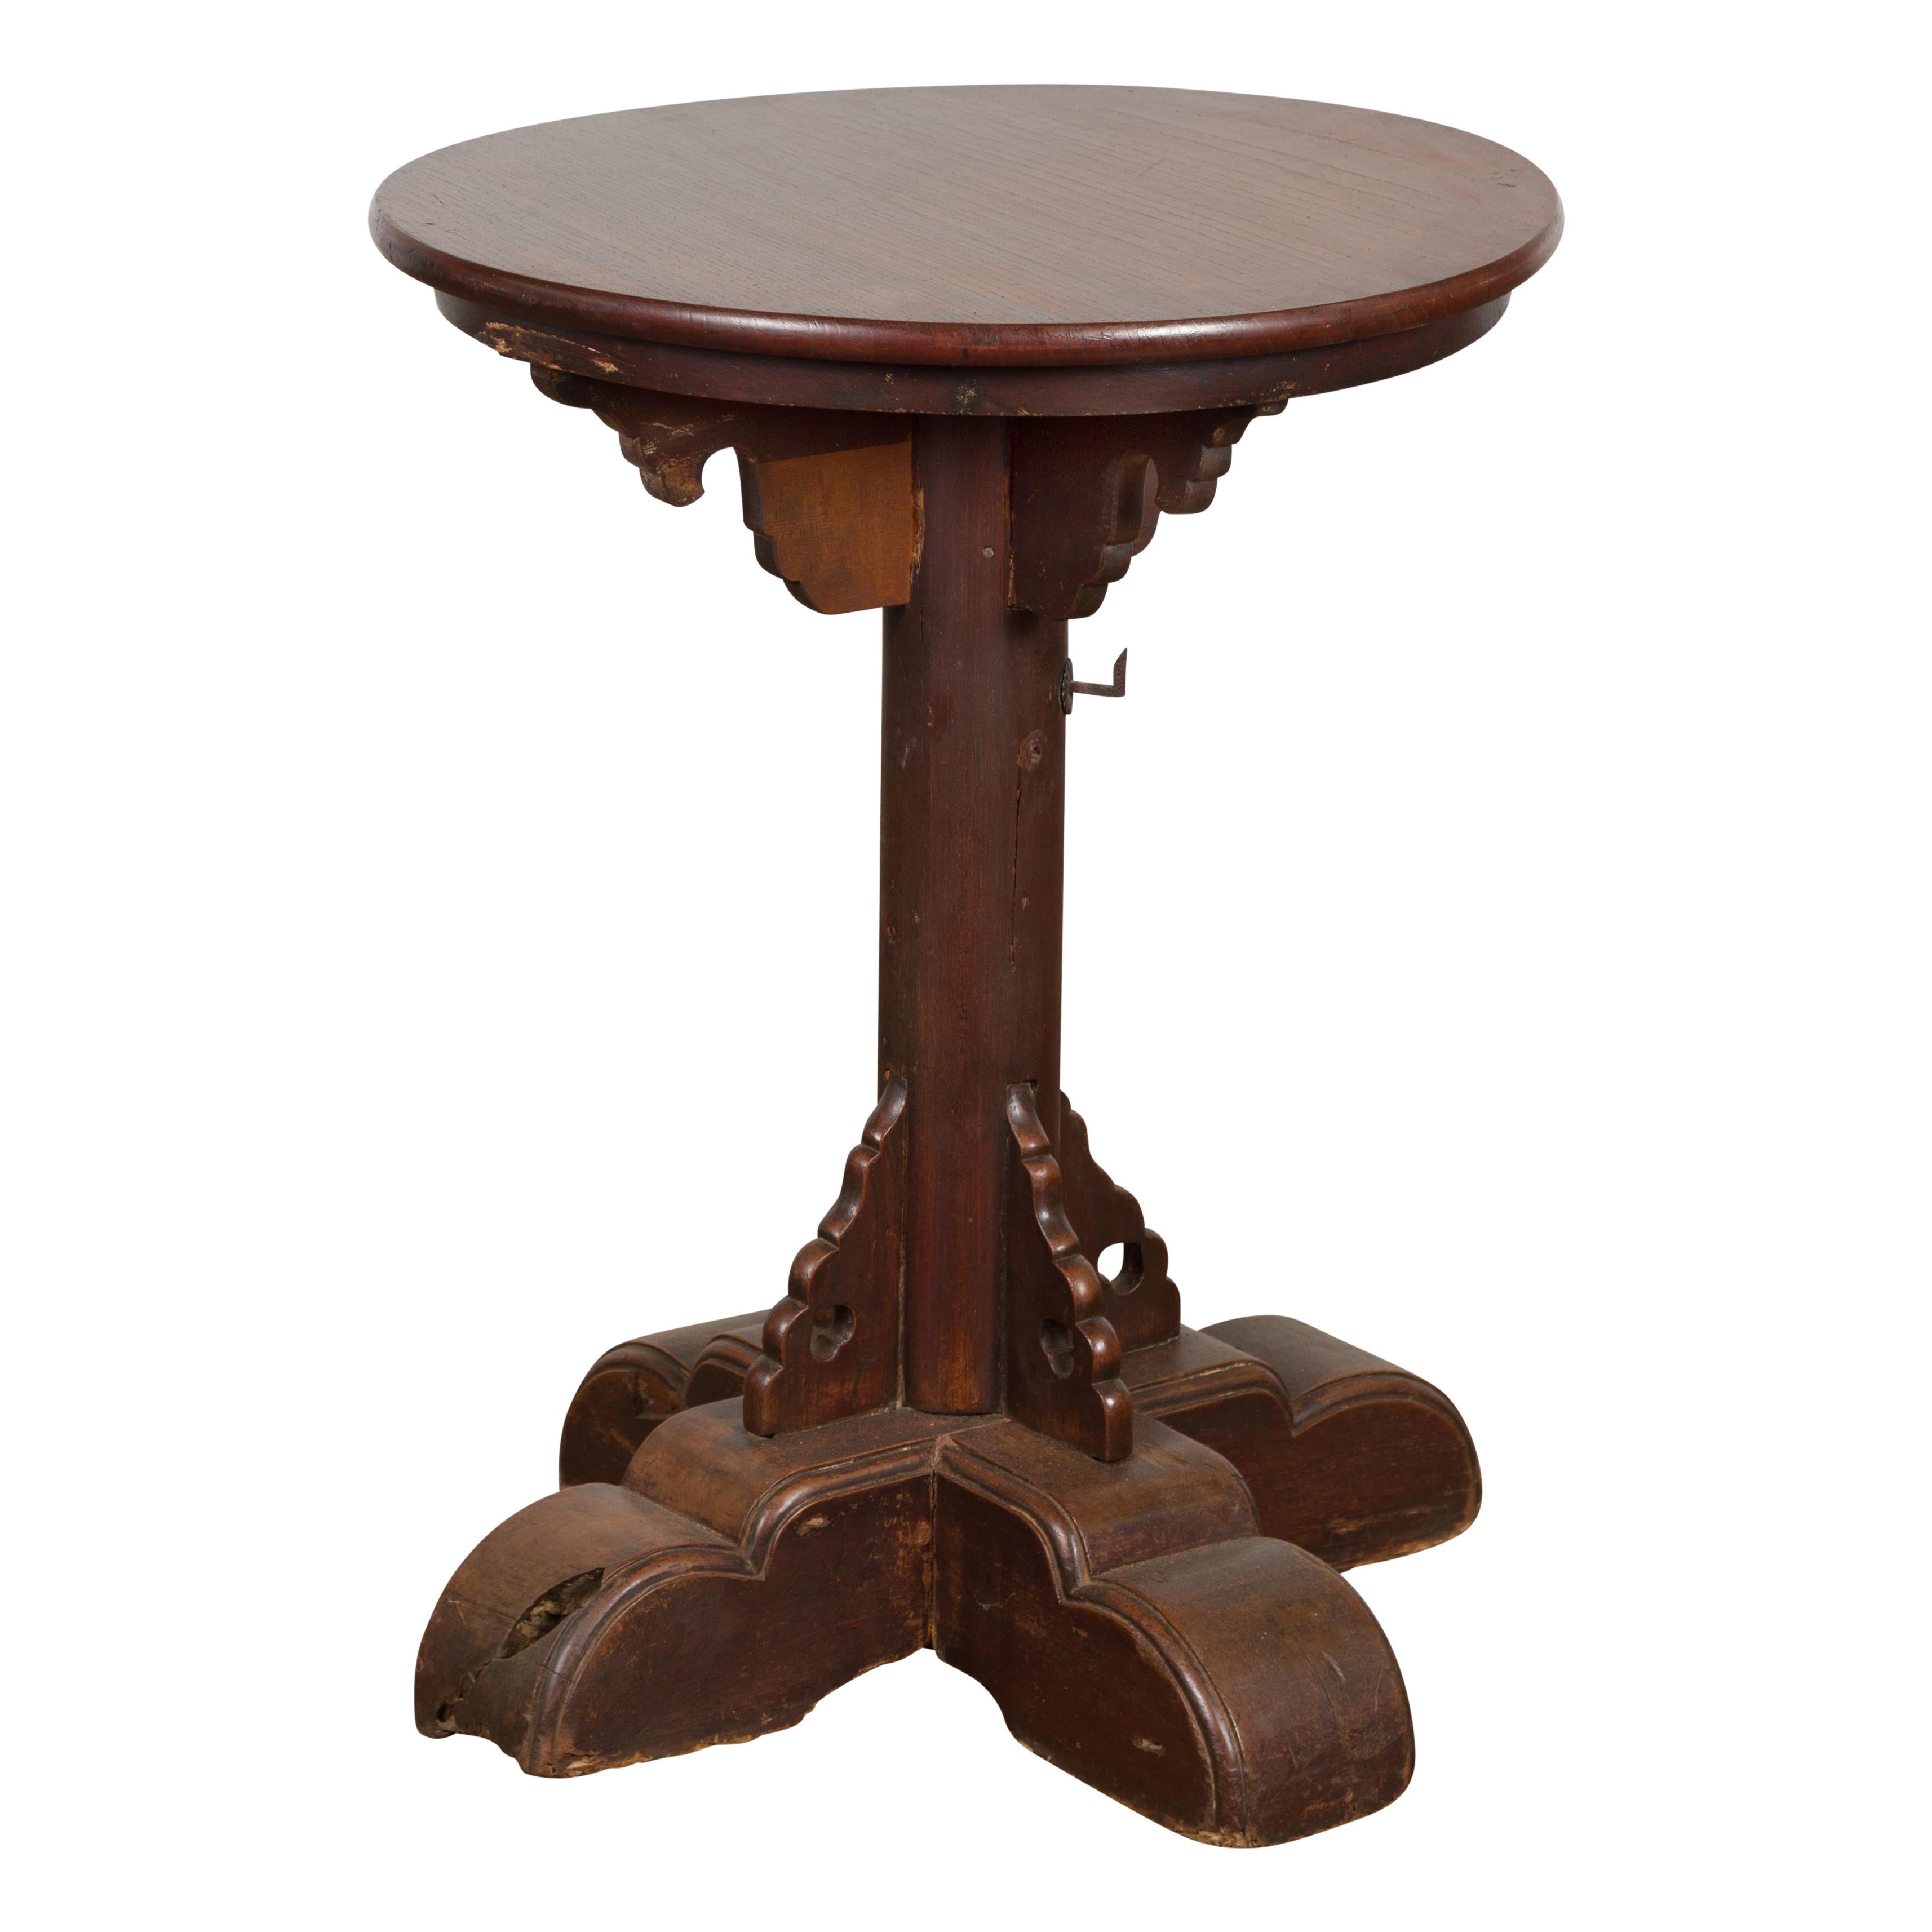 A Javanese antique pedestal table from the 19th century with circular top and quadripod base. Enhance your space with this Javanese antique pedestal table from the 19th century. Hand crafted, this table showcases a perfect balance of simplicity and